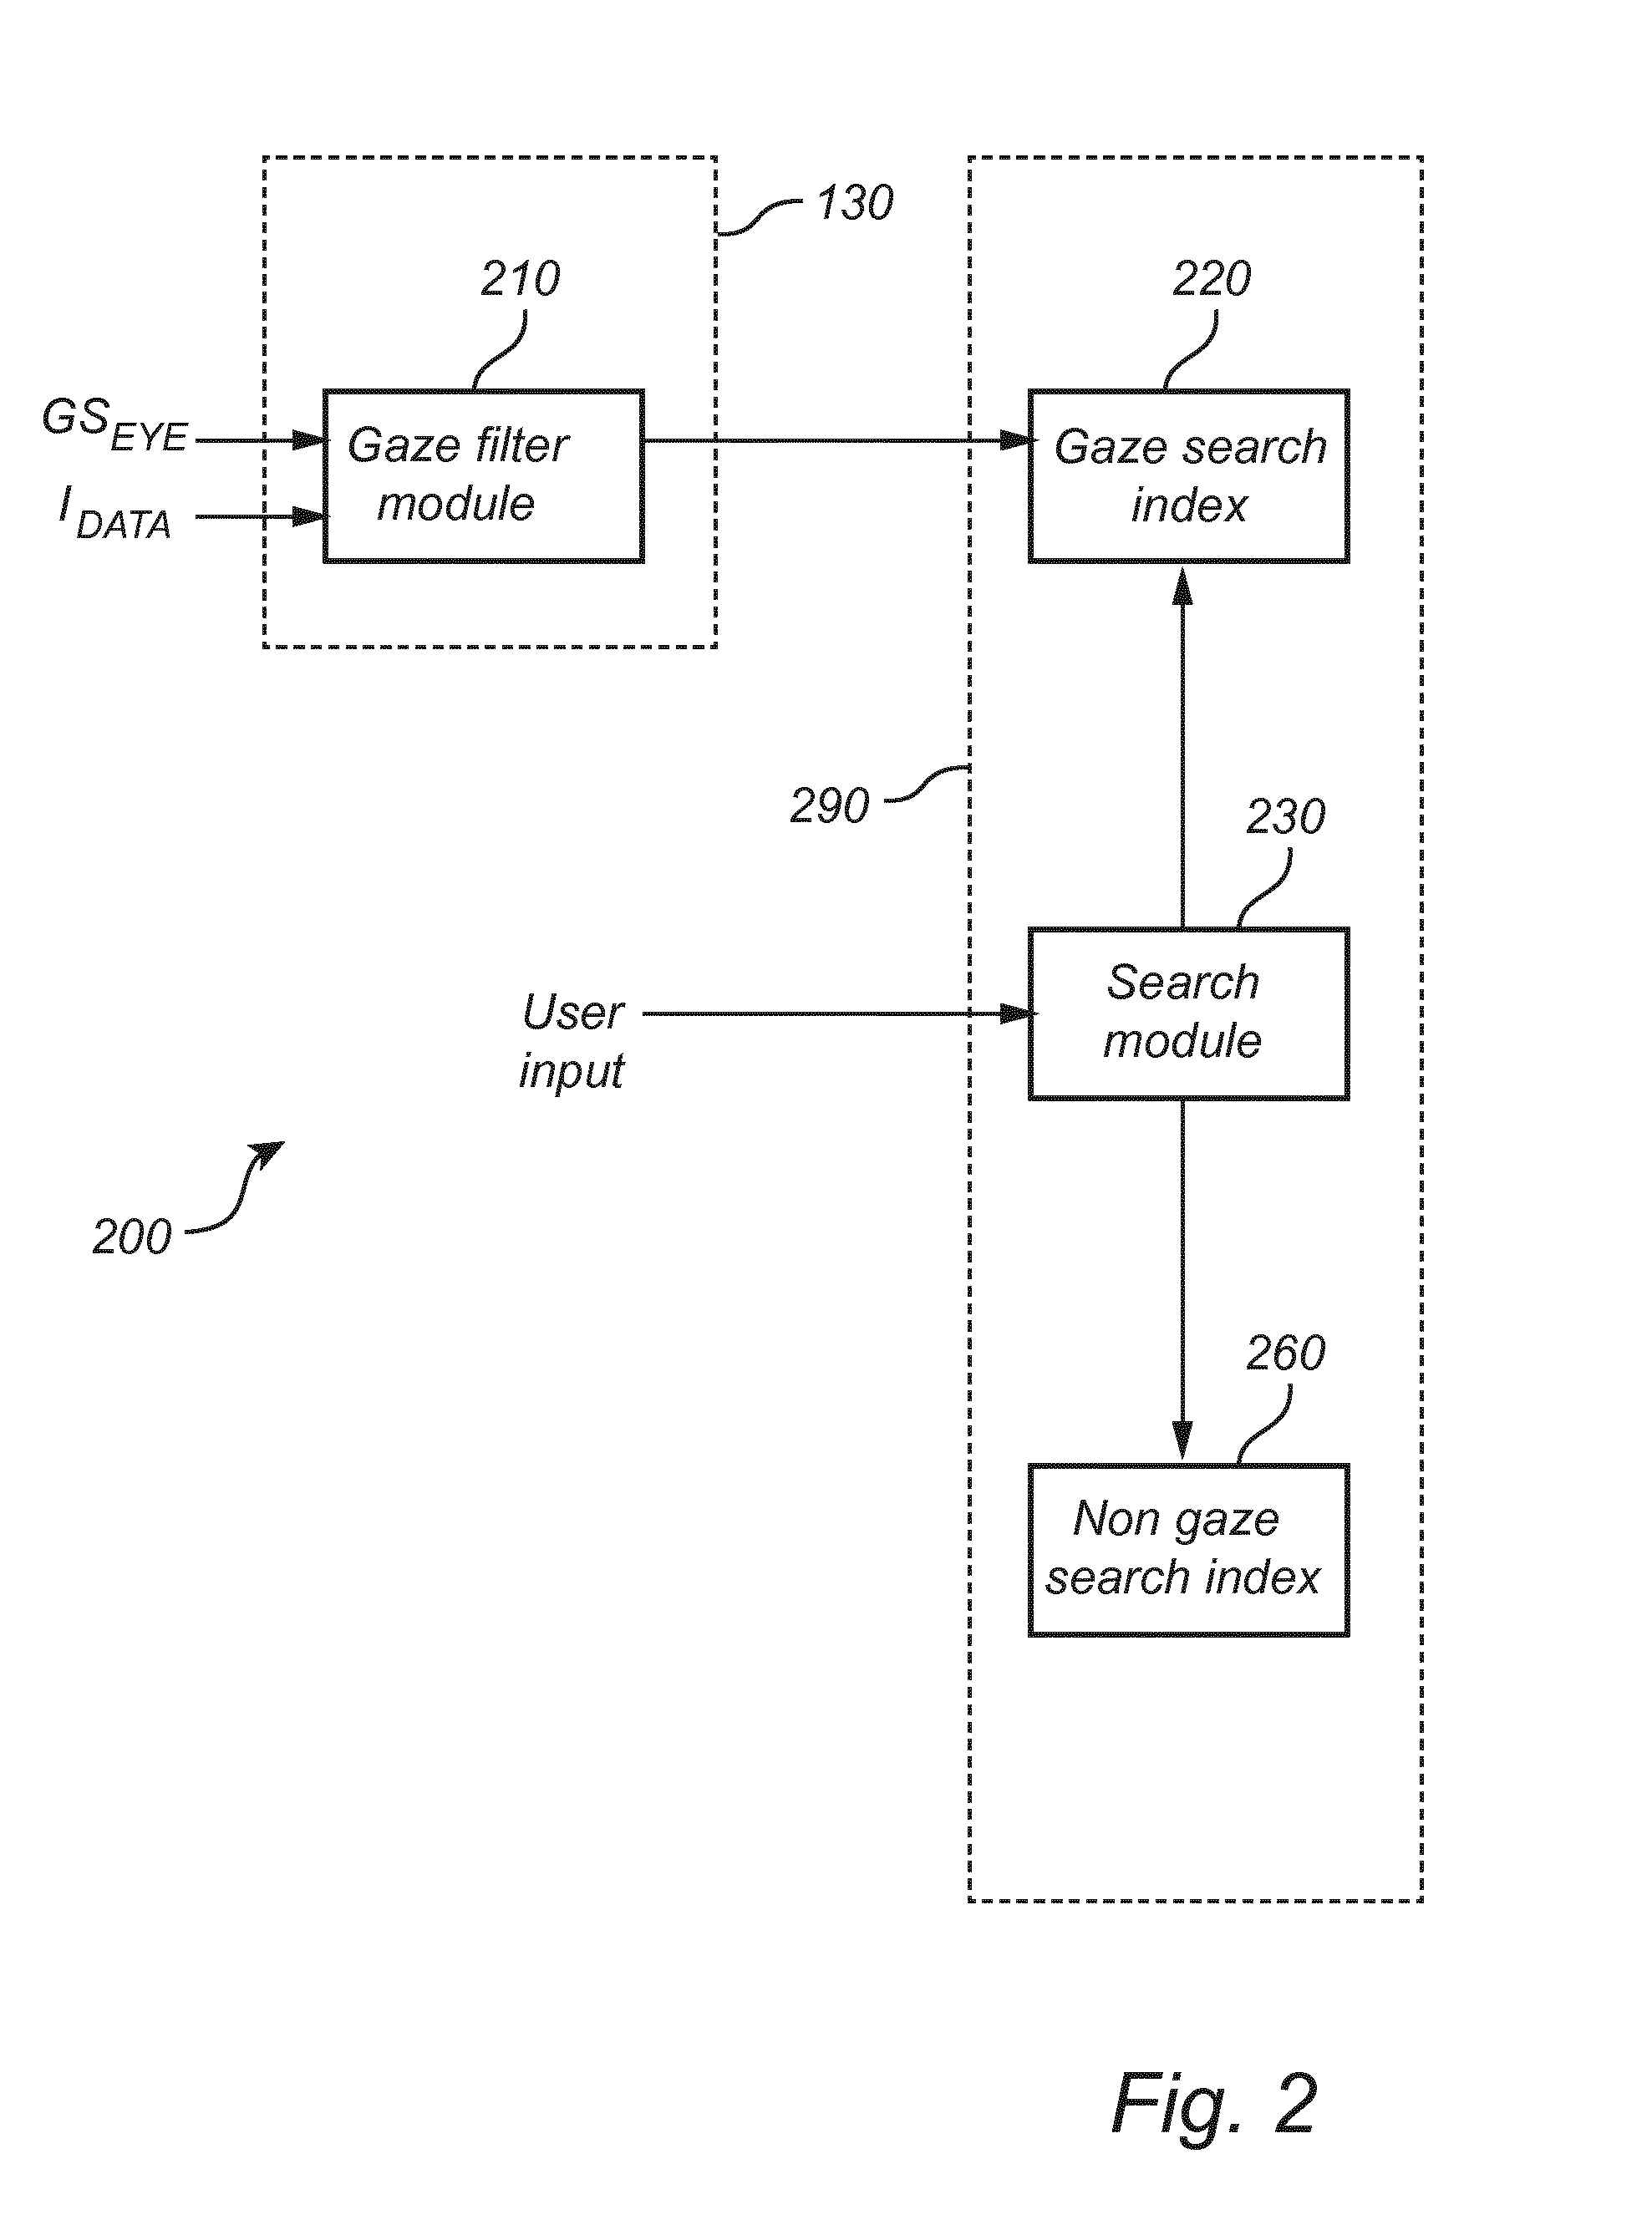 Method and system for user initiated query searches based on gaze data